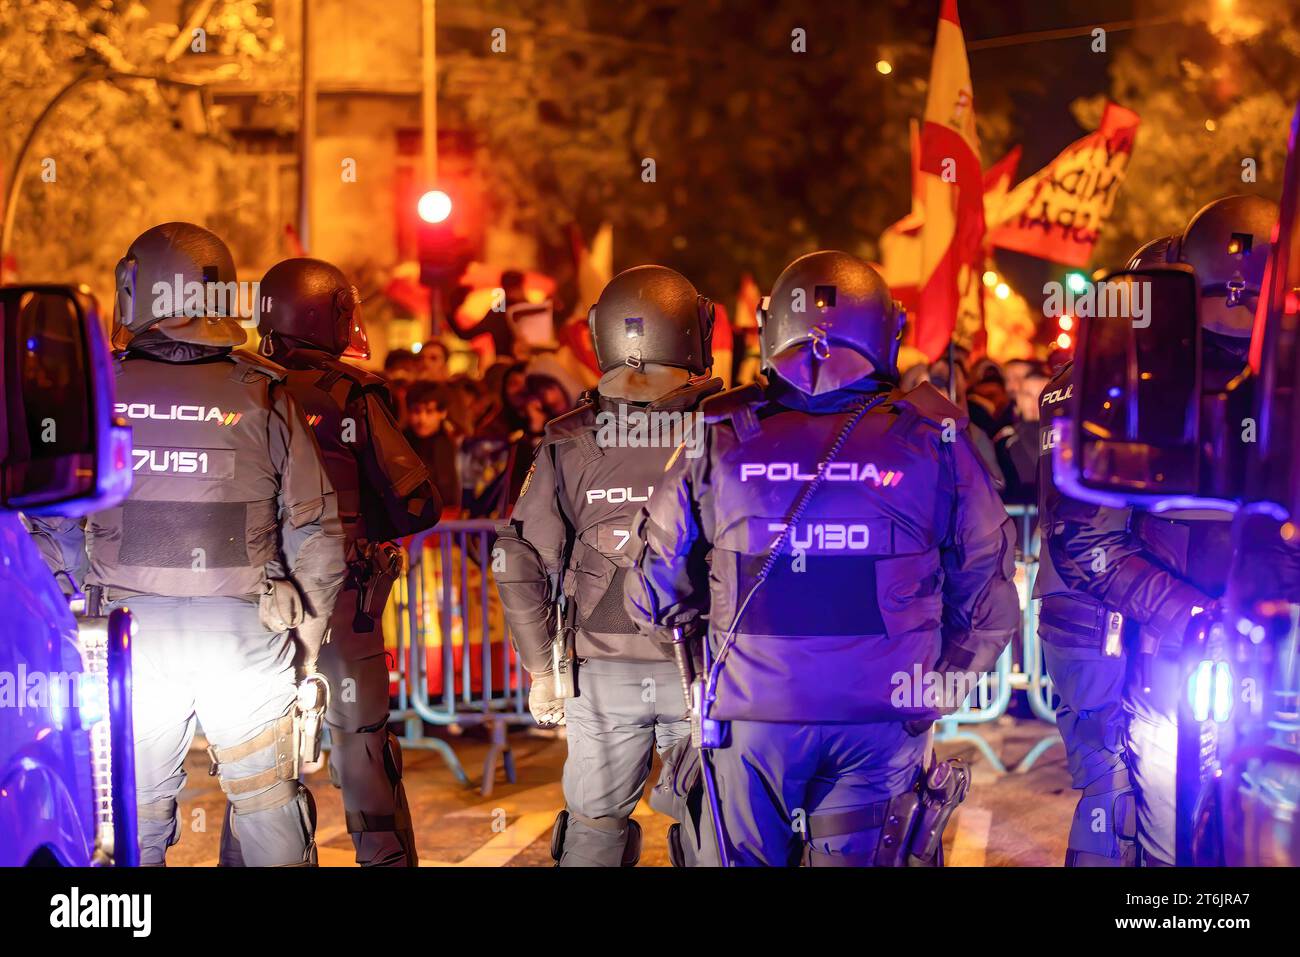 A group of national police observes the protesters standing behind the security fence during the protest against the amnesty of the Catalan independence politicians and against President Pedro Sanchez in front of the headquarters of the Spanish socialist workers' party along Ferraz Street. Stock Photo